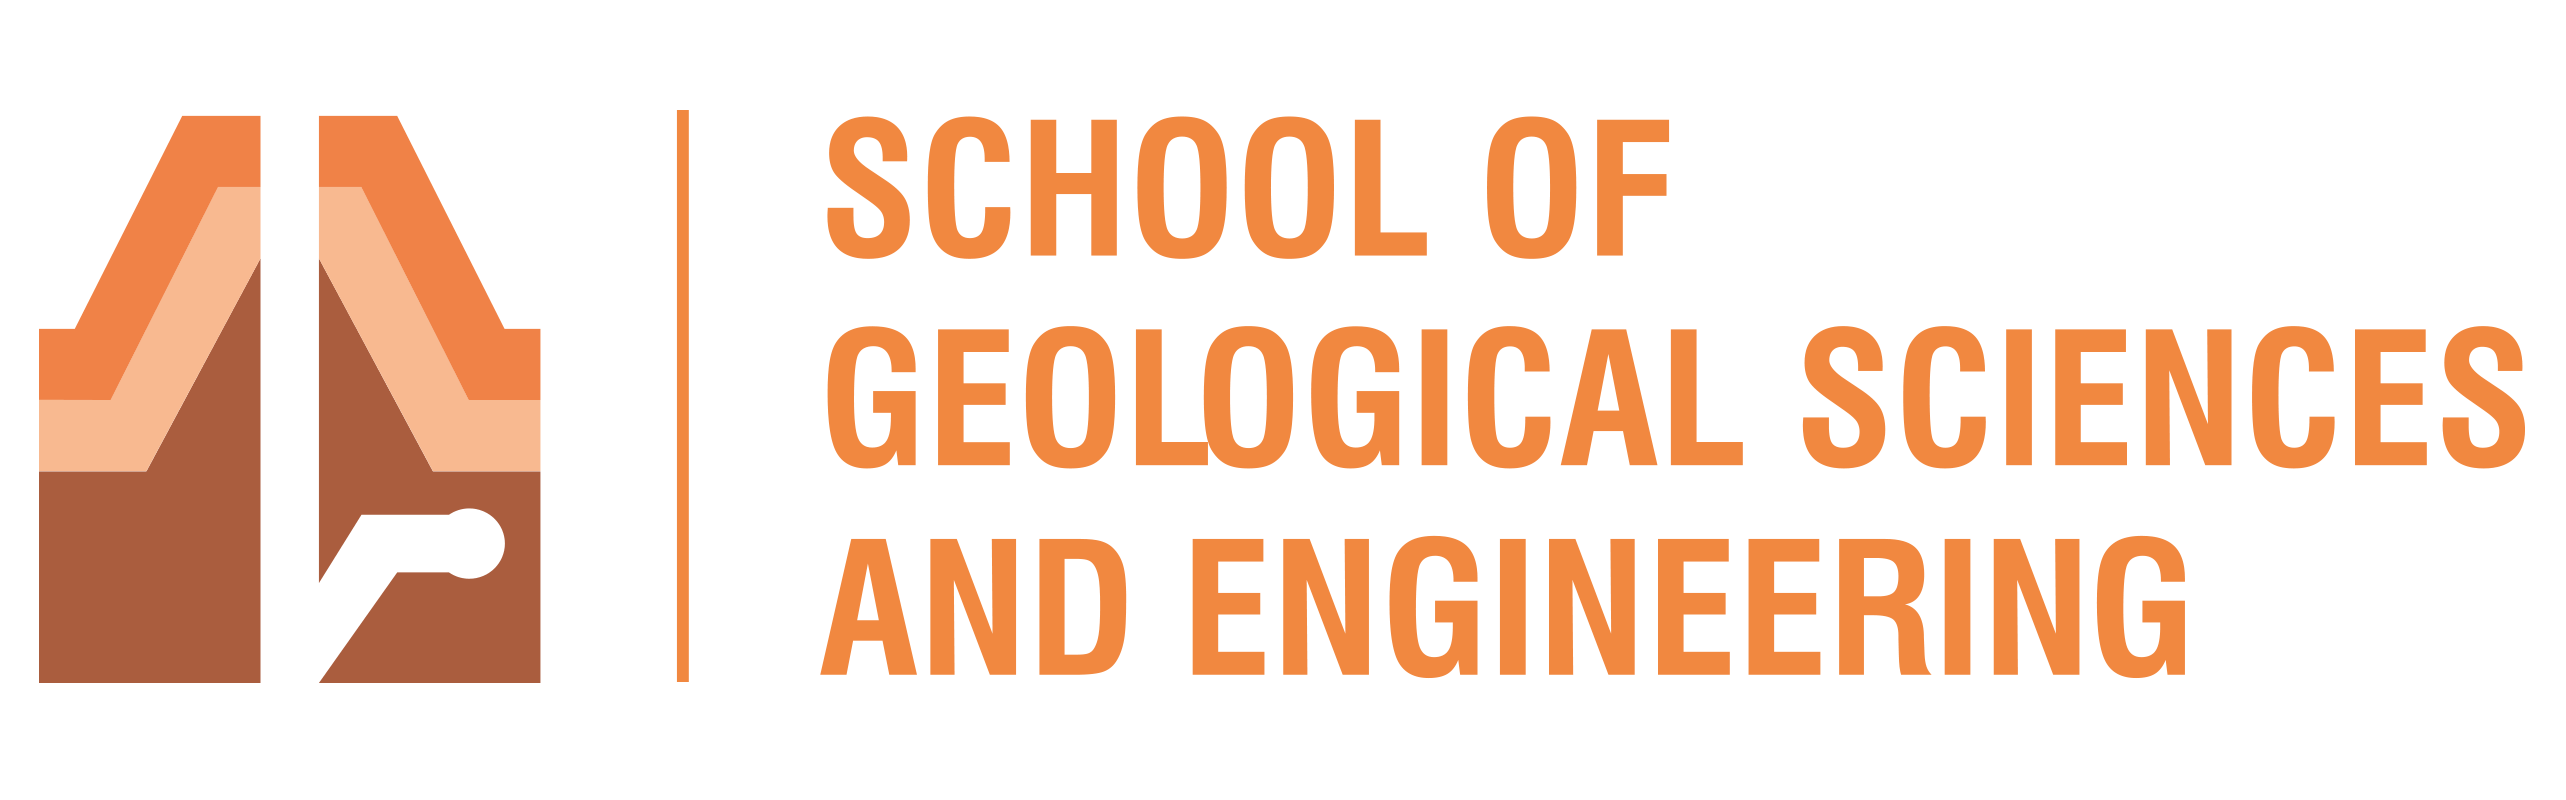 Geological Sciences and Engineering